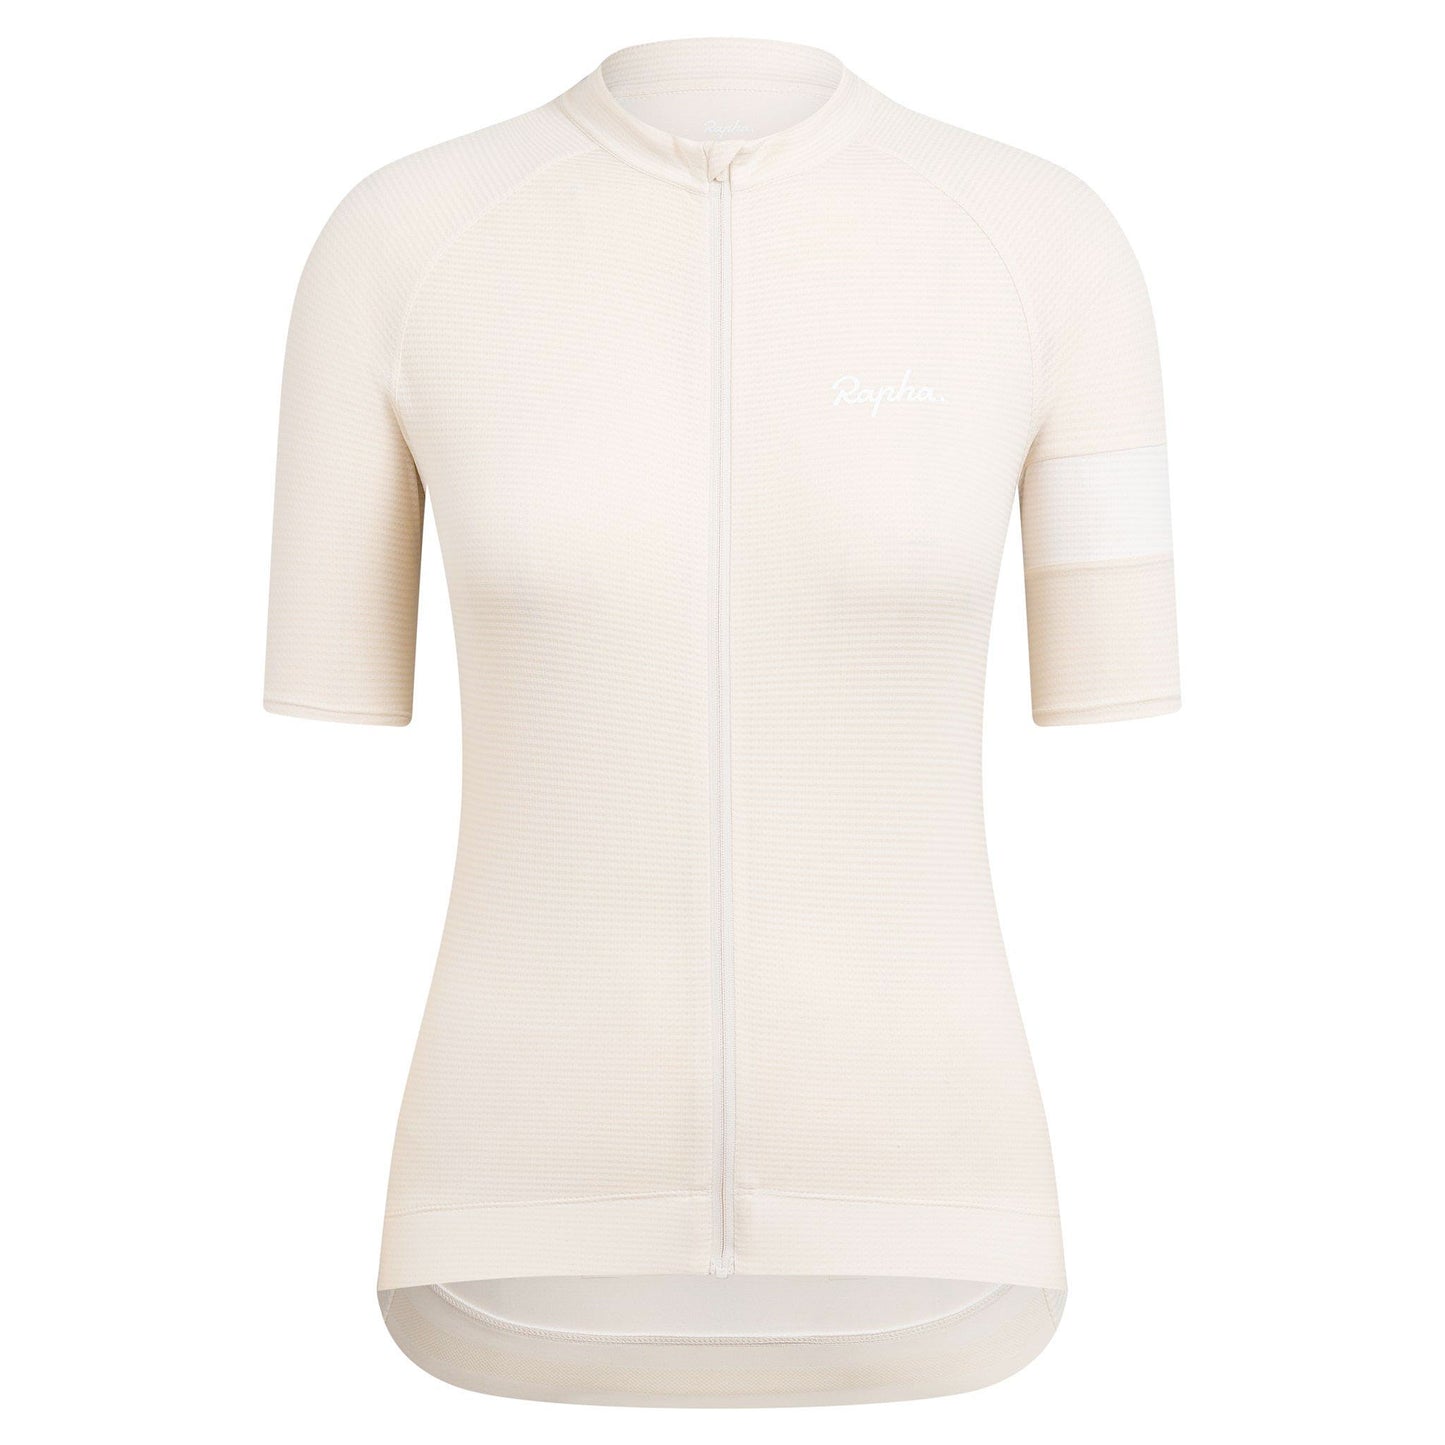 Rapha Women's Core Lightweight Jersey - Off-White buy online at Woolys Wheels Sydney with free delivery